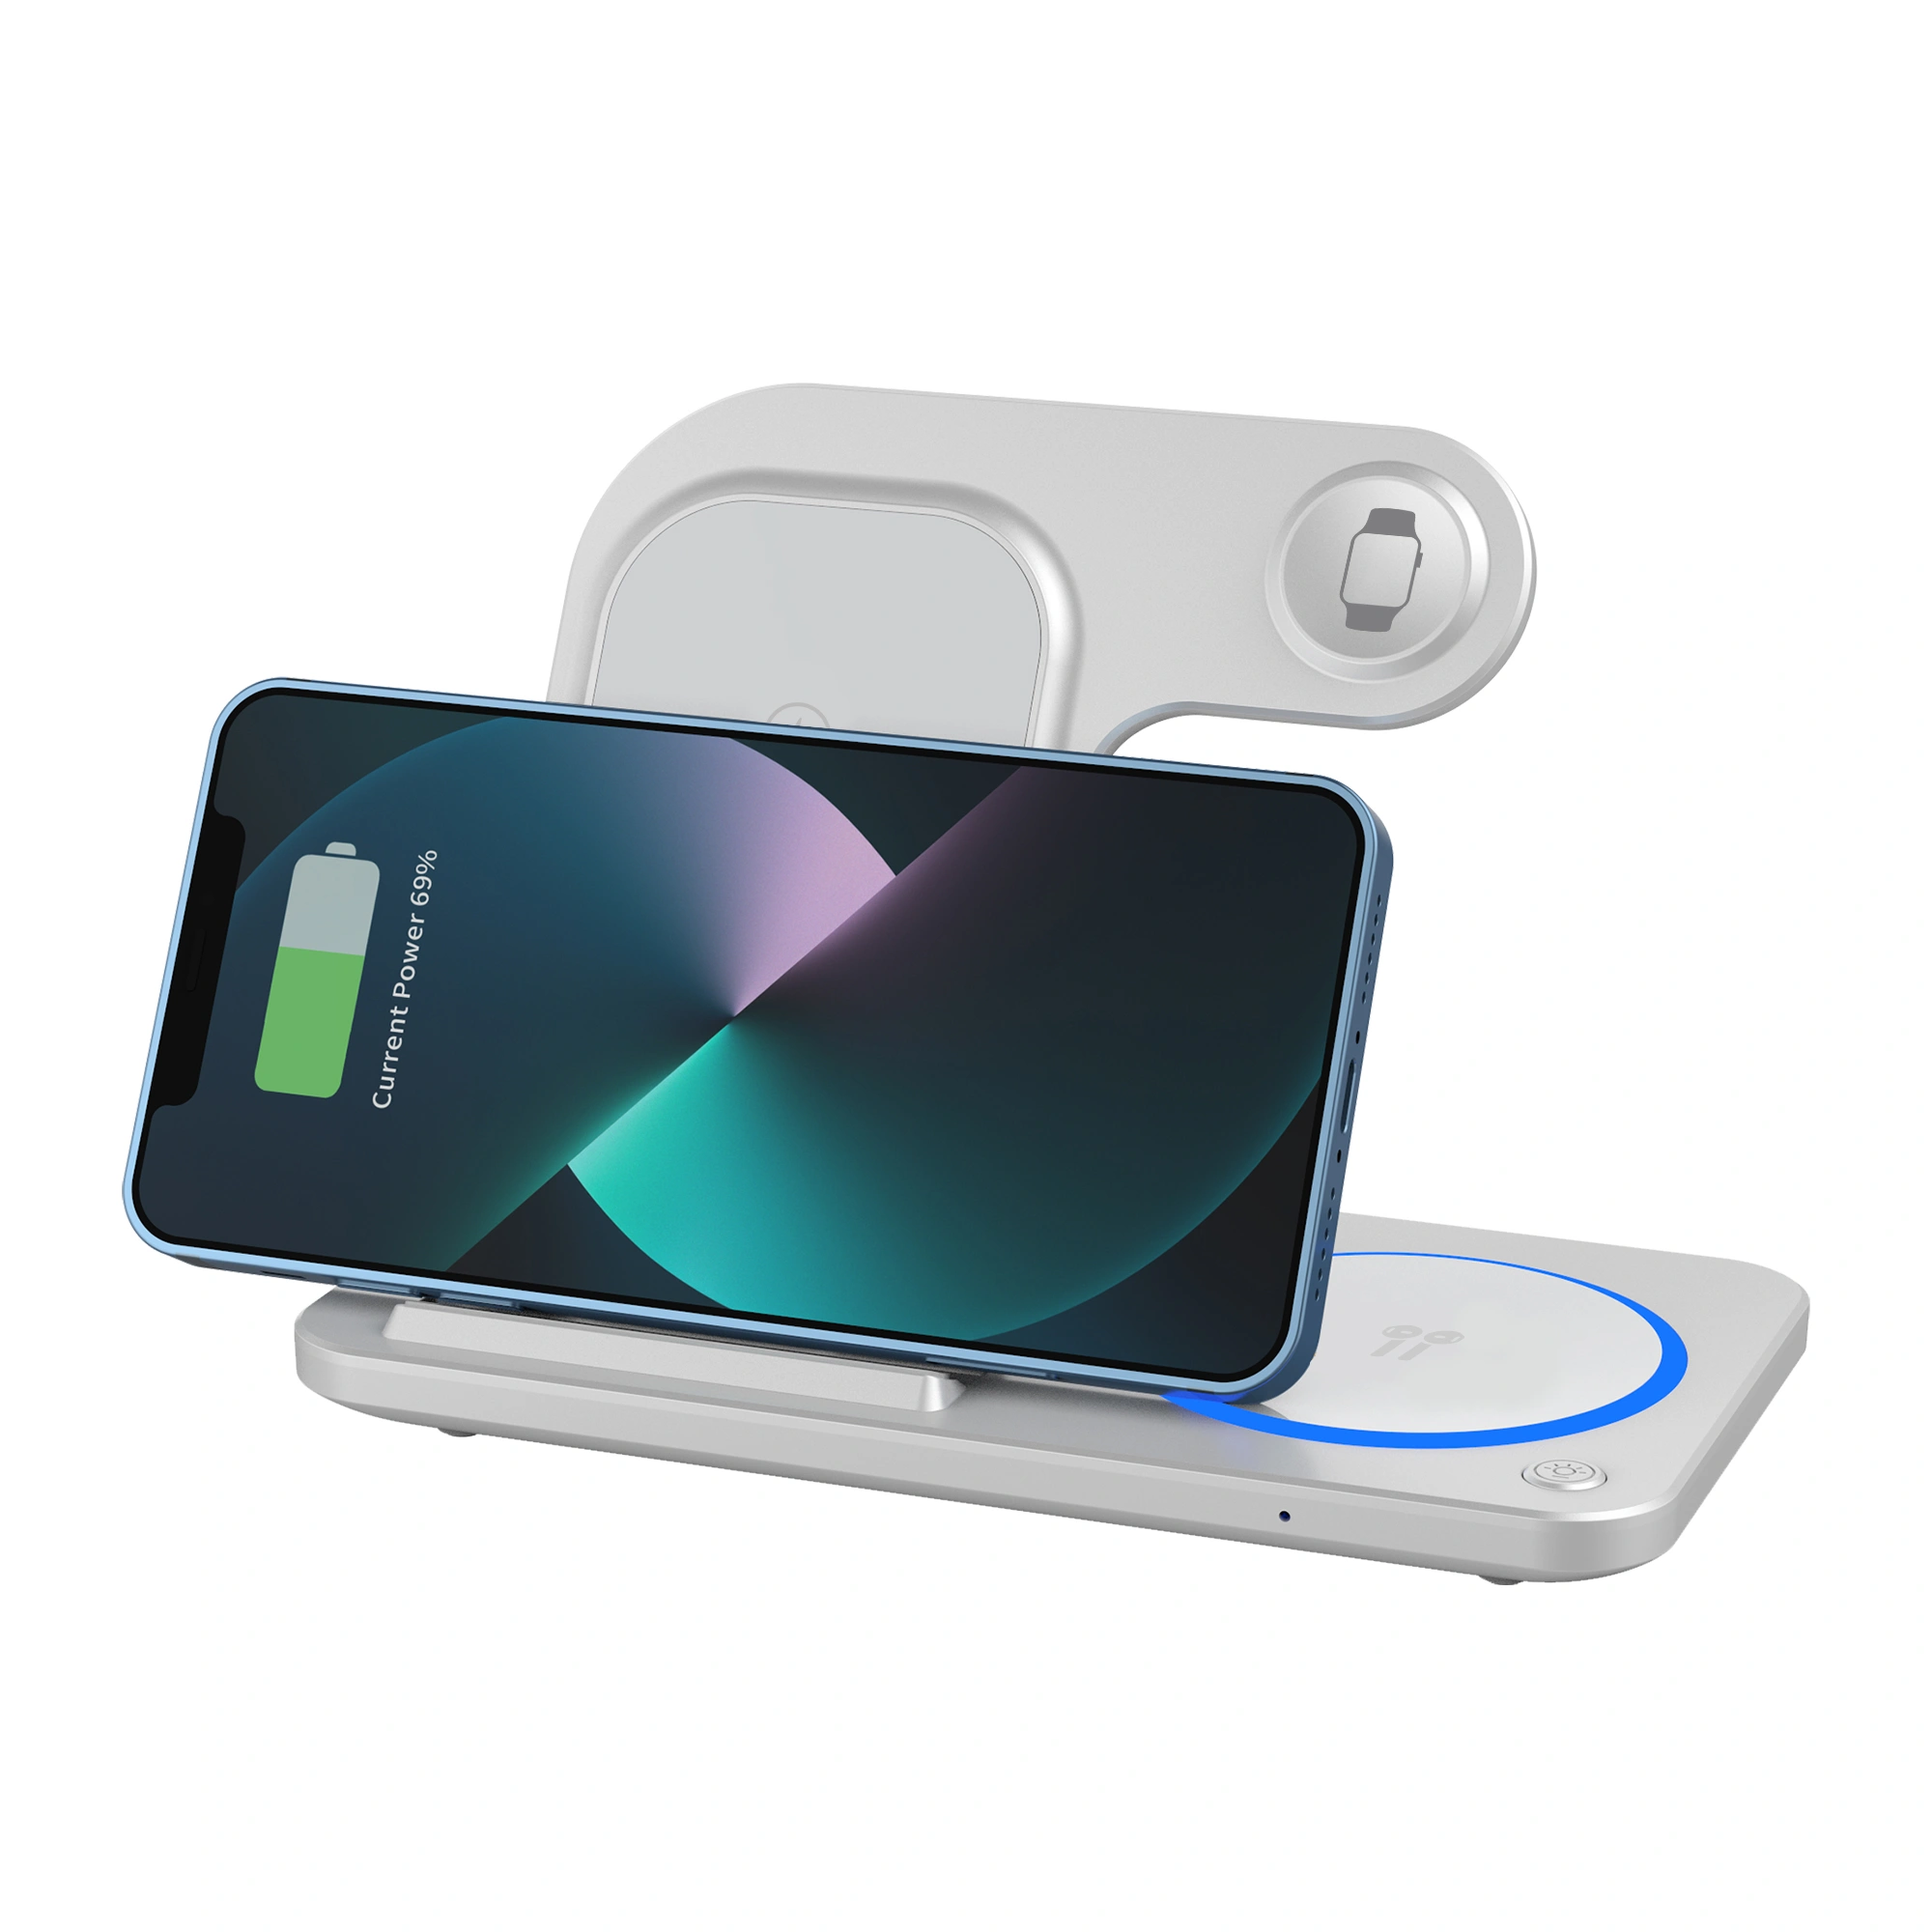 Auto Orient Wiwu Material: Abs+Pc Type C Charging Port Support 15W Max Wireless Charging 3 In 1 Wireless Charge For Phone, Airpods, Iwatch Net Weight 320G Wiwu Wi-W020 Foldable 15W 3 In 1 Wireless Charger Wiwu Wi-W020 Foldable 15W 3 In 1 Wireless Charger - White